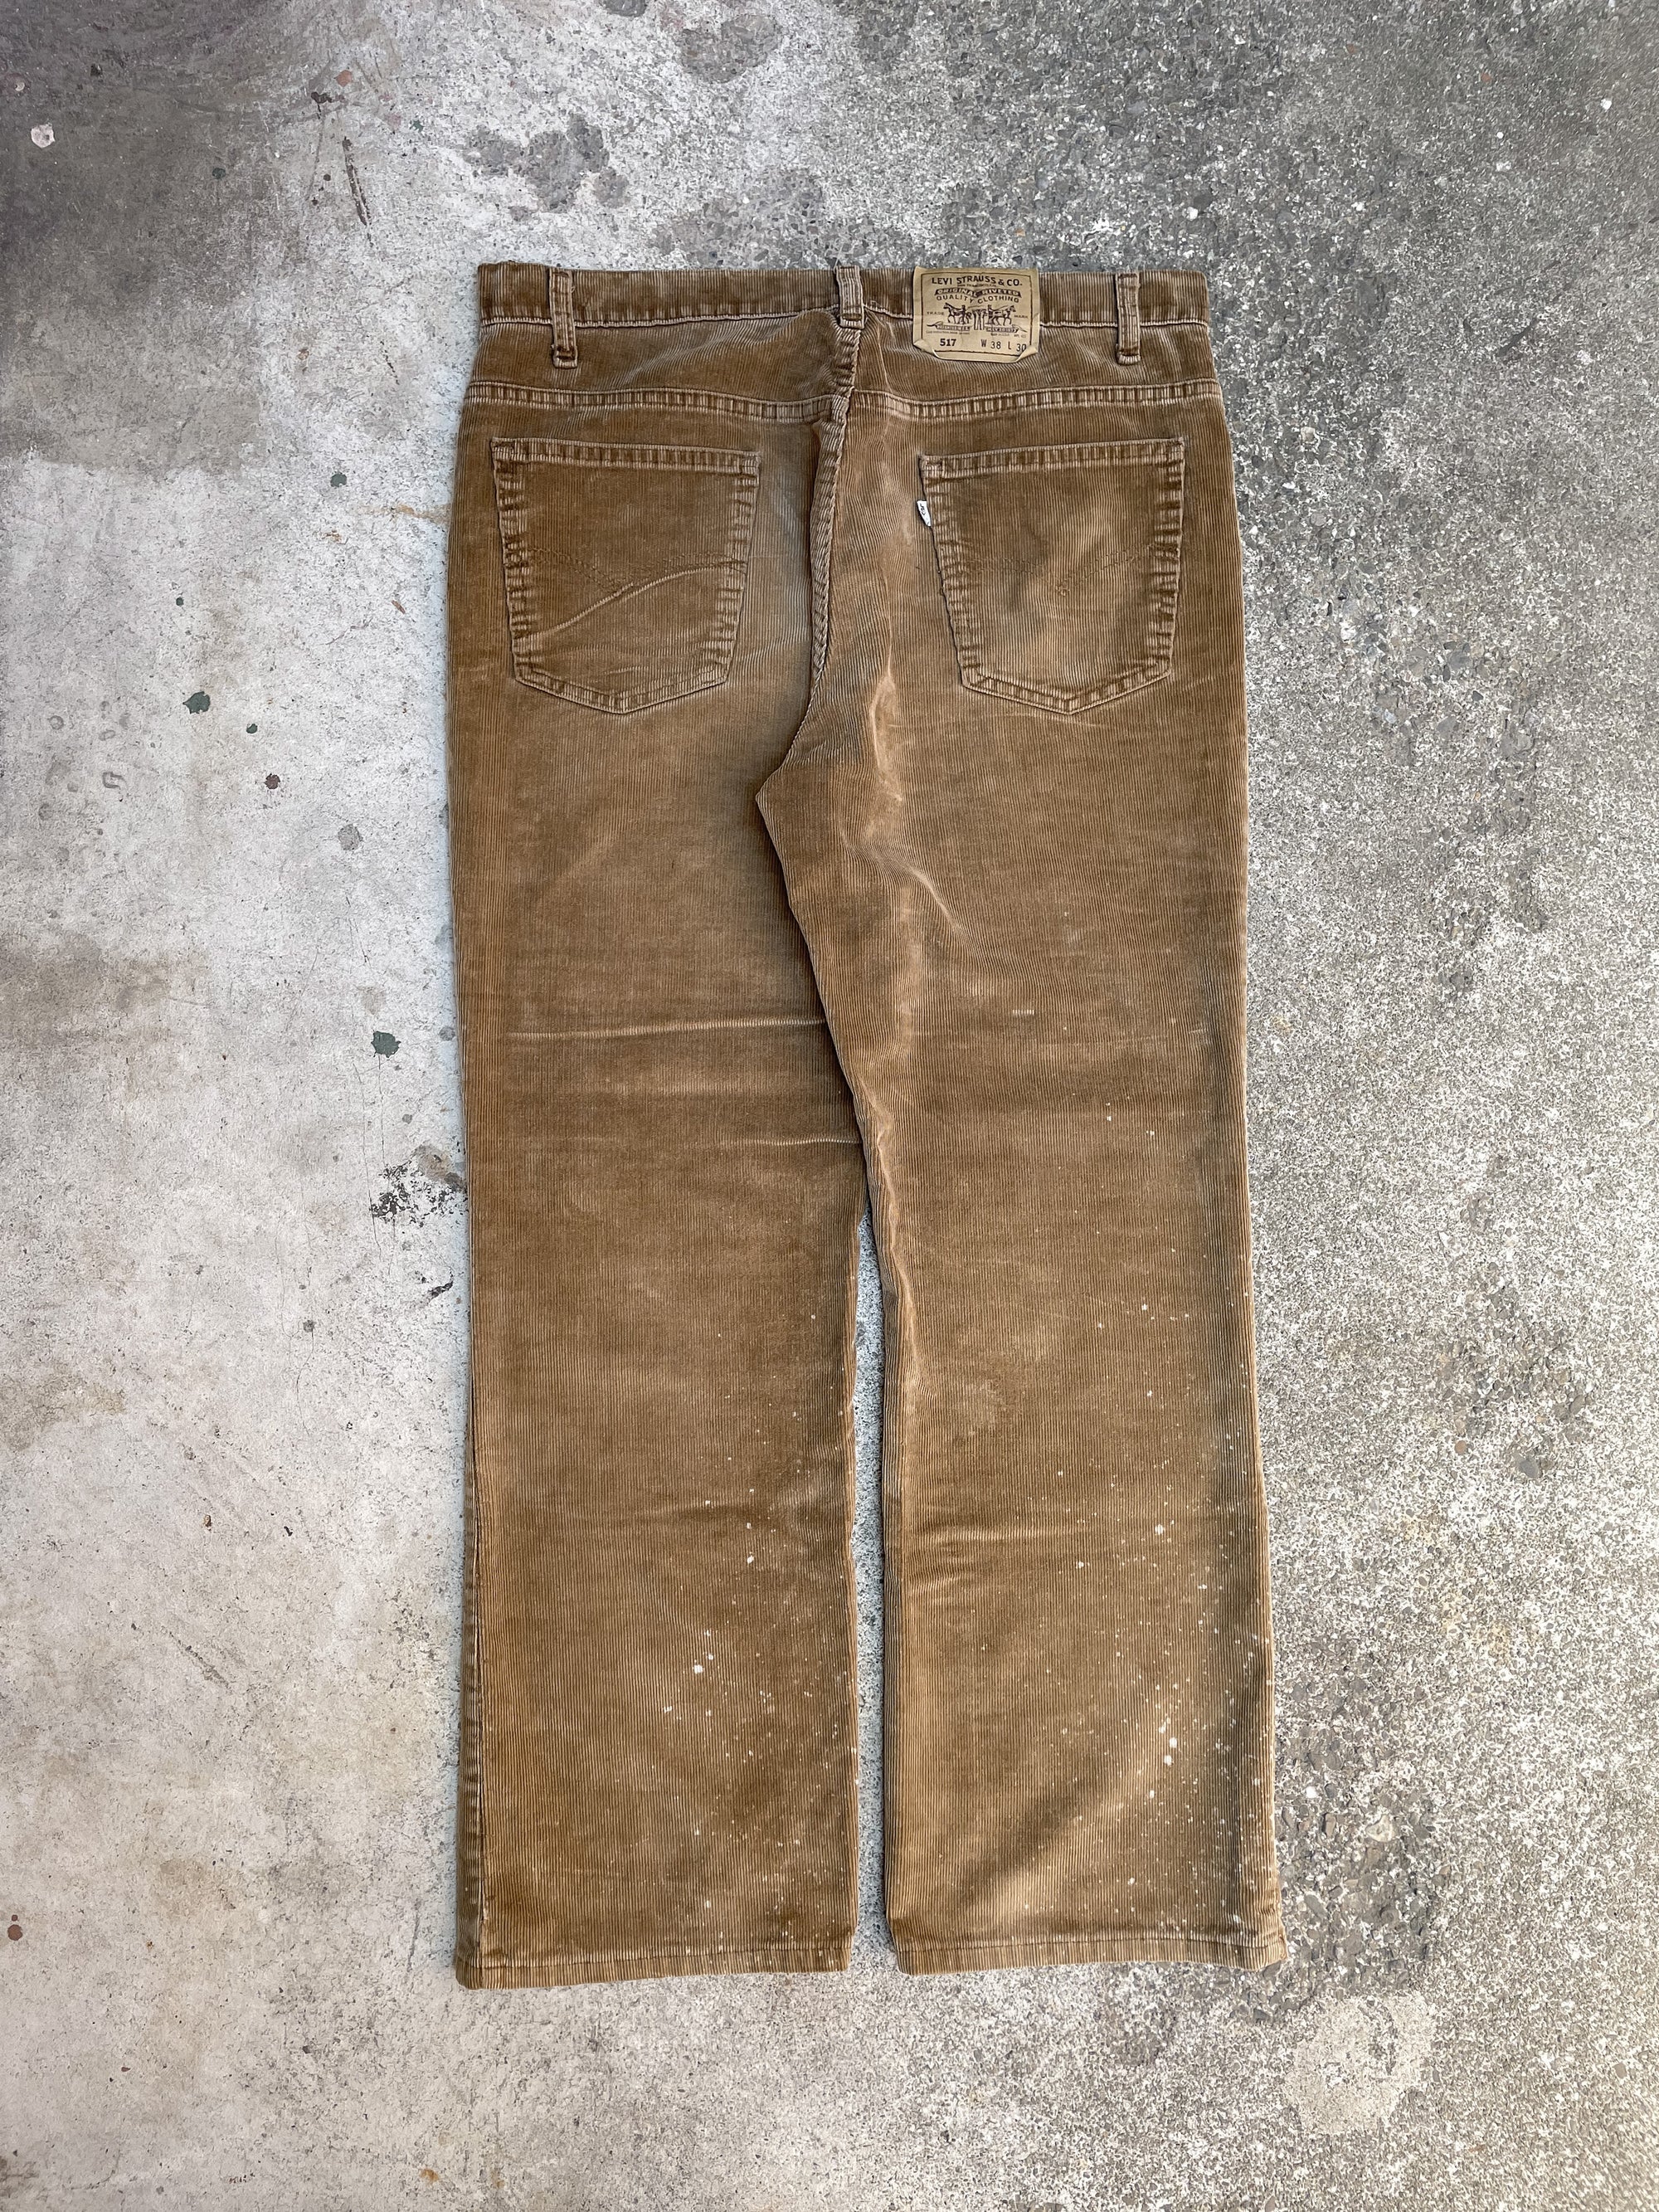 1980s/90s White Tab Levi’s Faded Brown Corduroy 517 (36X28)